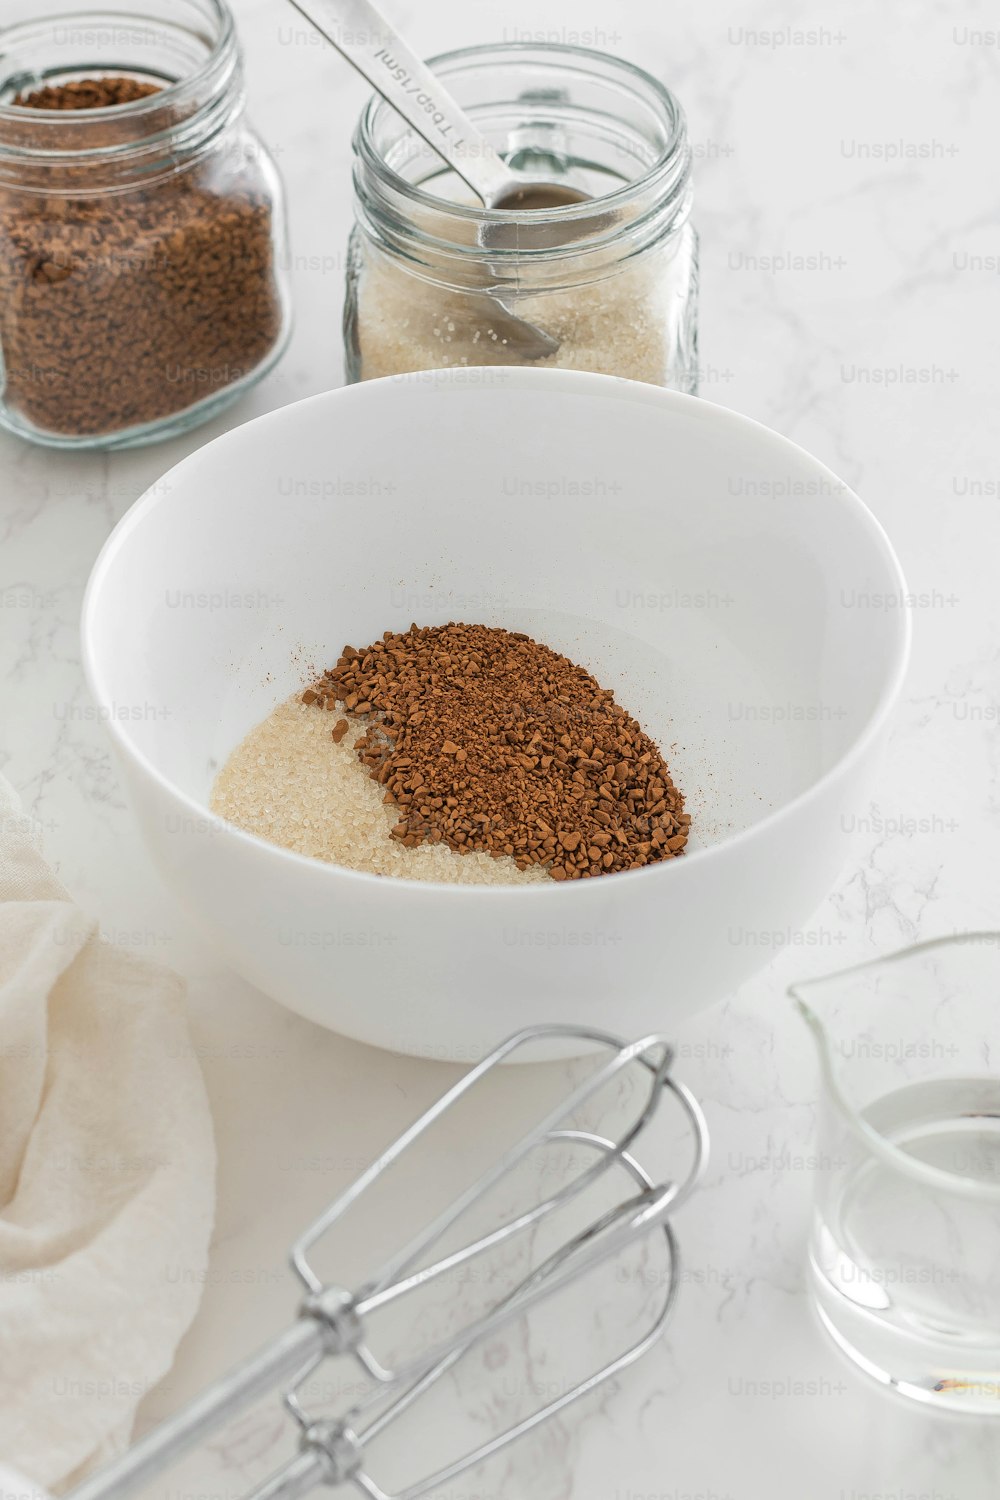 a white bowl filled with spices next to a whisk